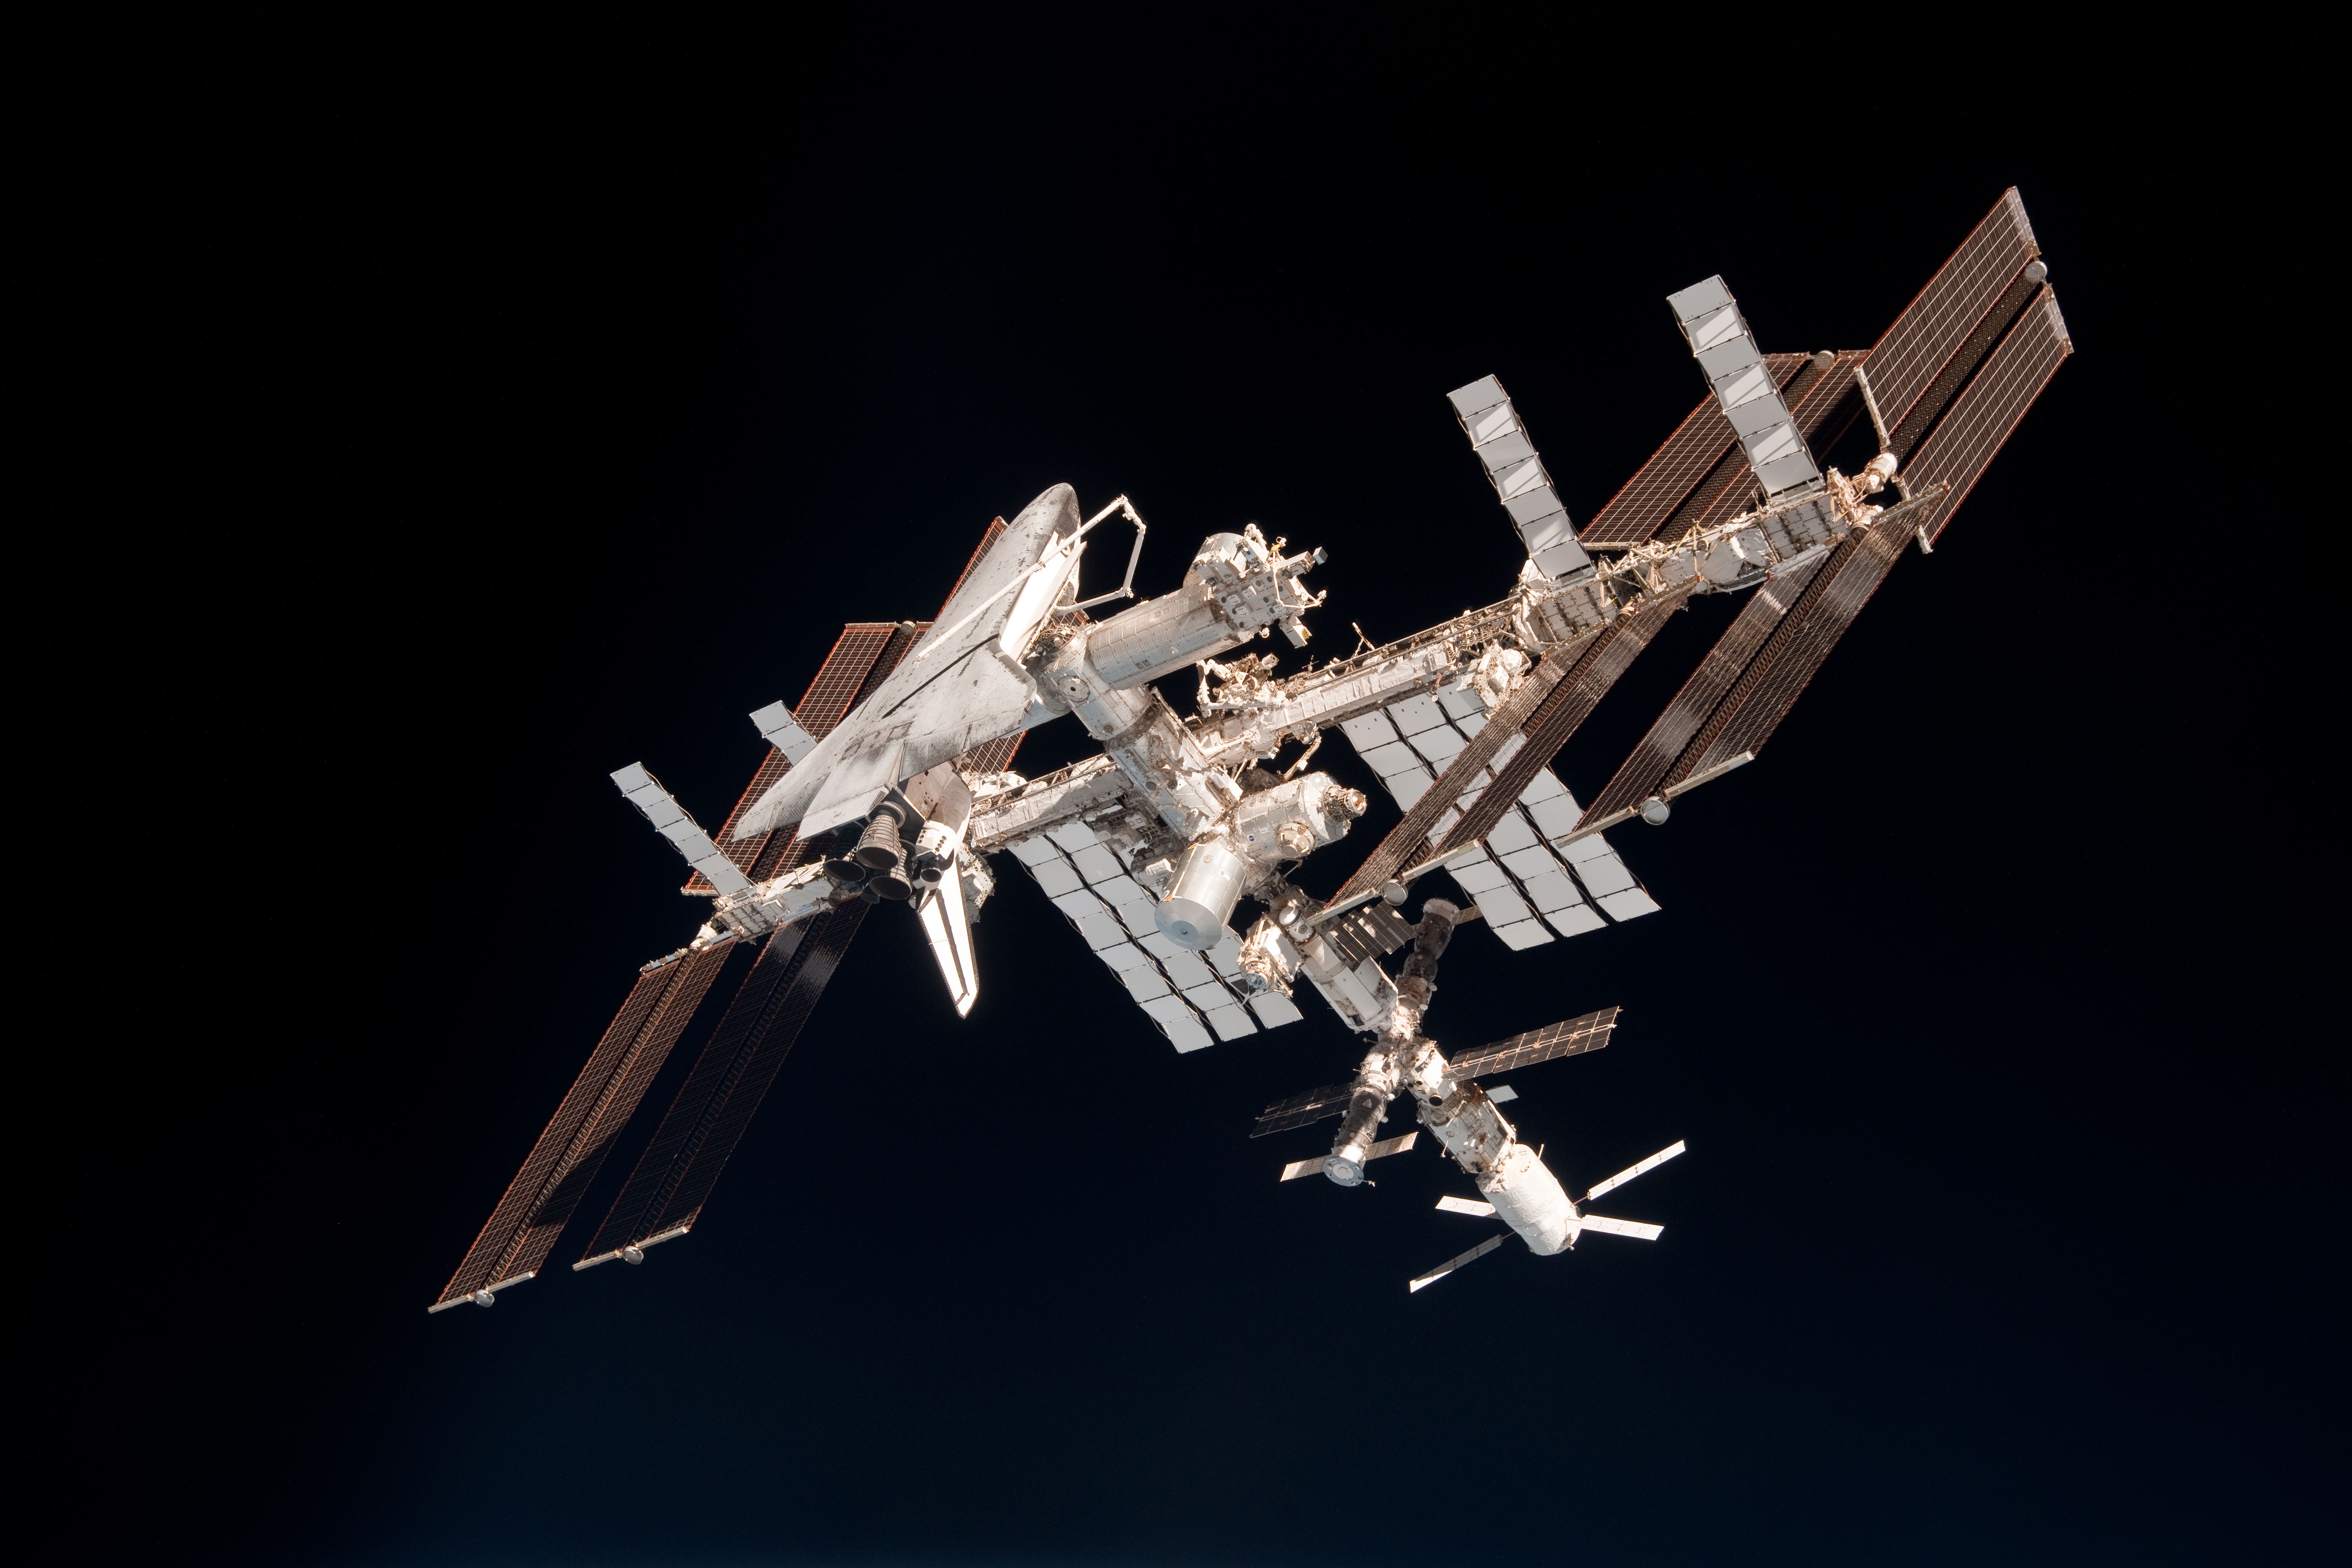 Iss Space Shuttle Nasa Station Endeavour